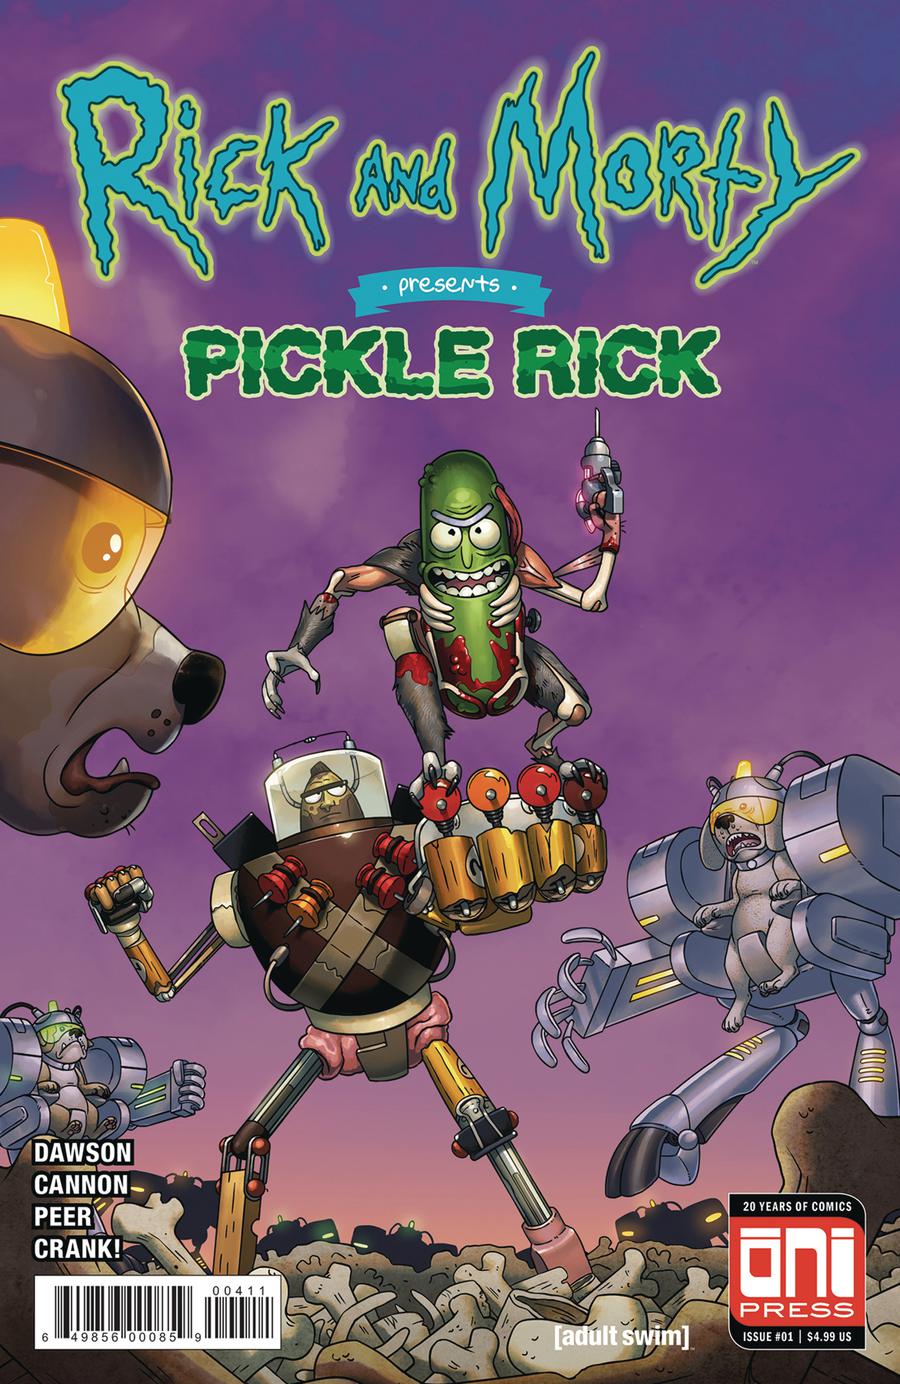 Rick And Morty Presents Pickle Rick #1 Cover A Regular CJ Cannon Cover